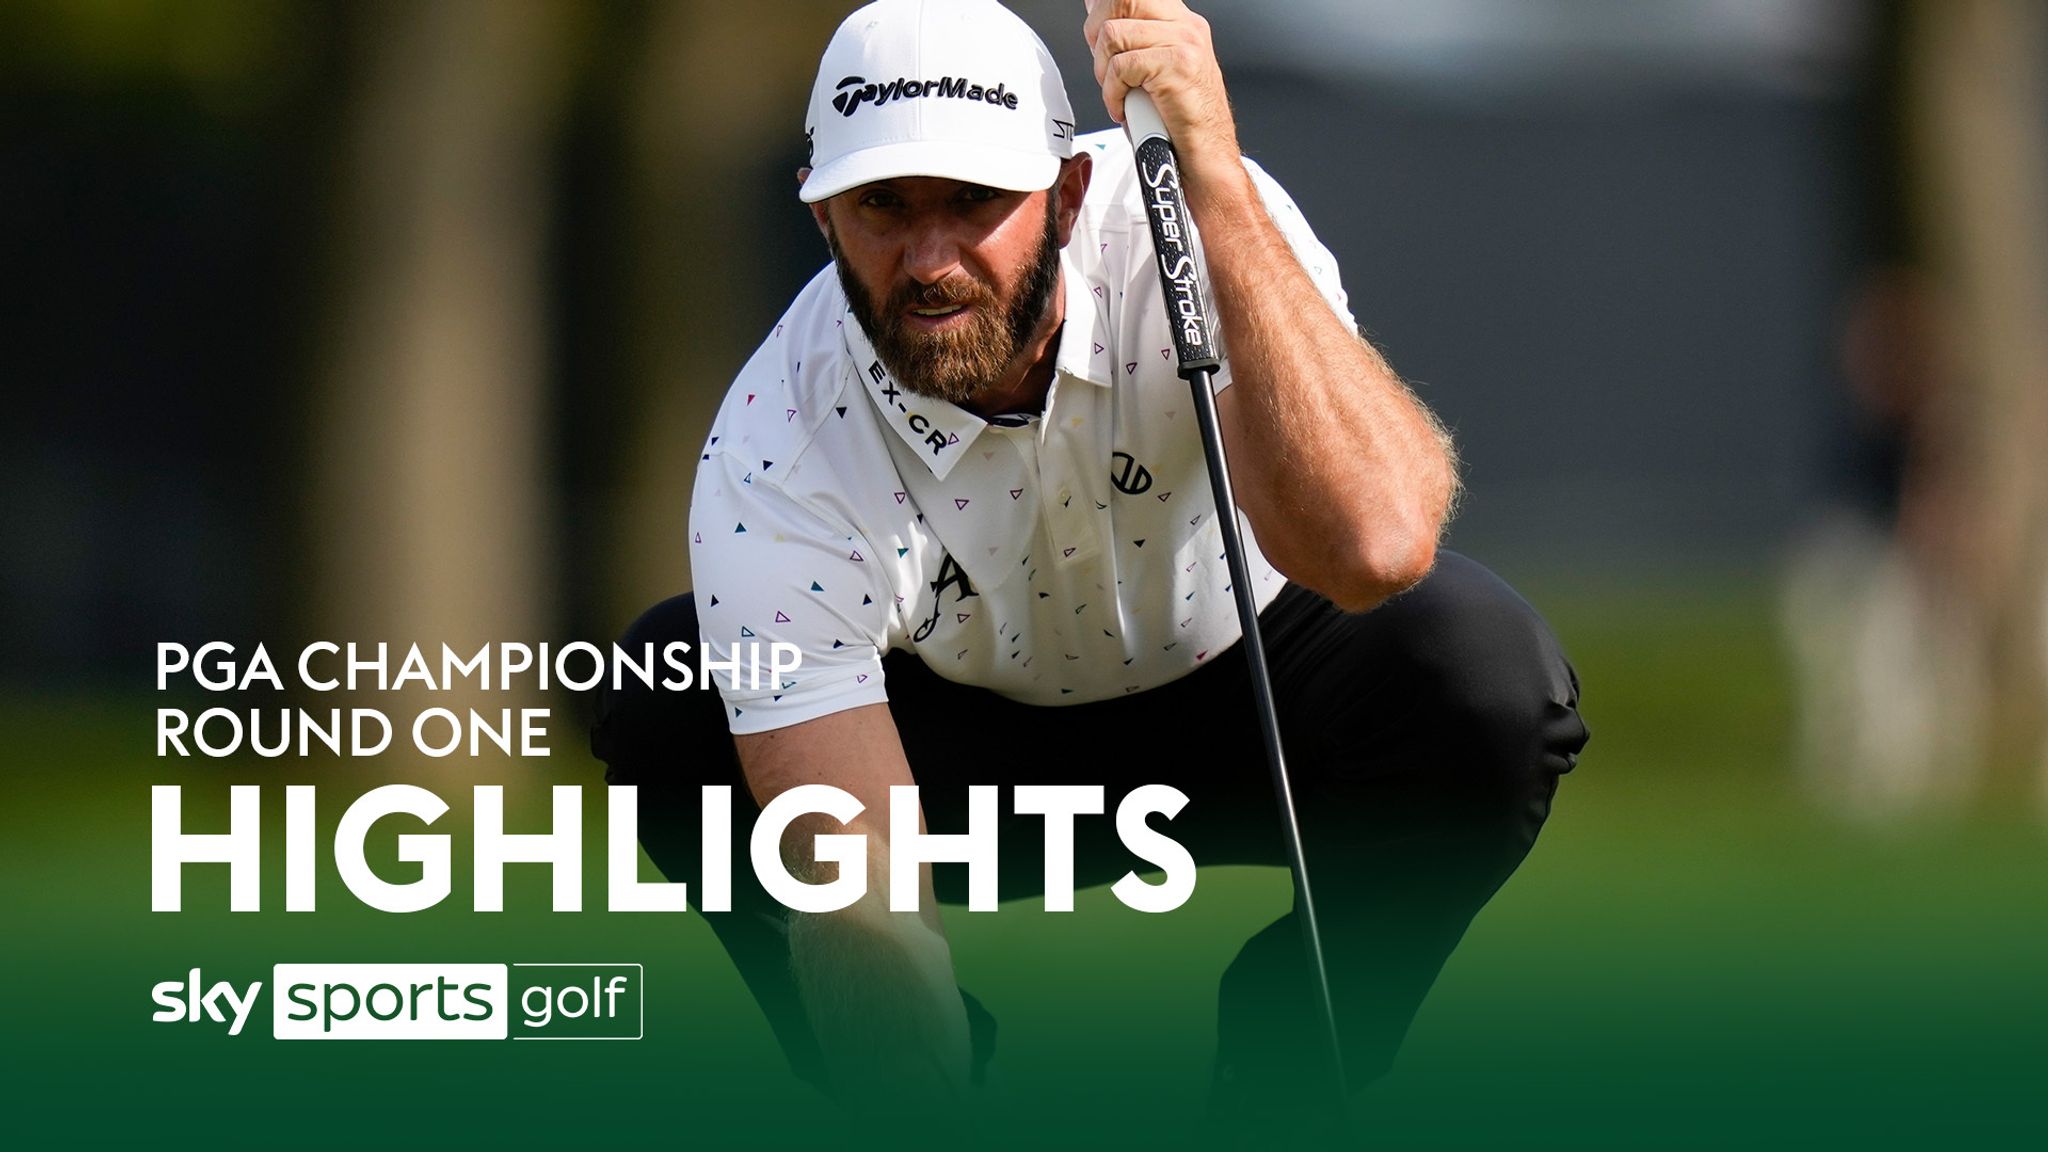 PGA Championship Round One highlights Video Watch TV Show Sky Sports